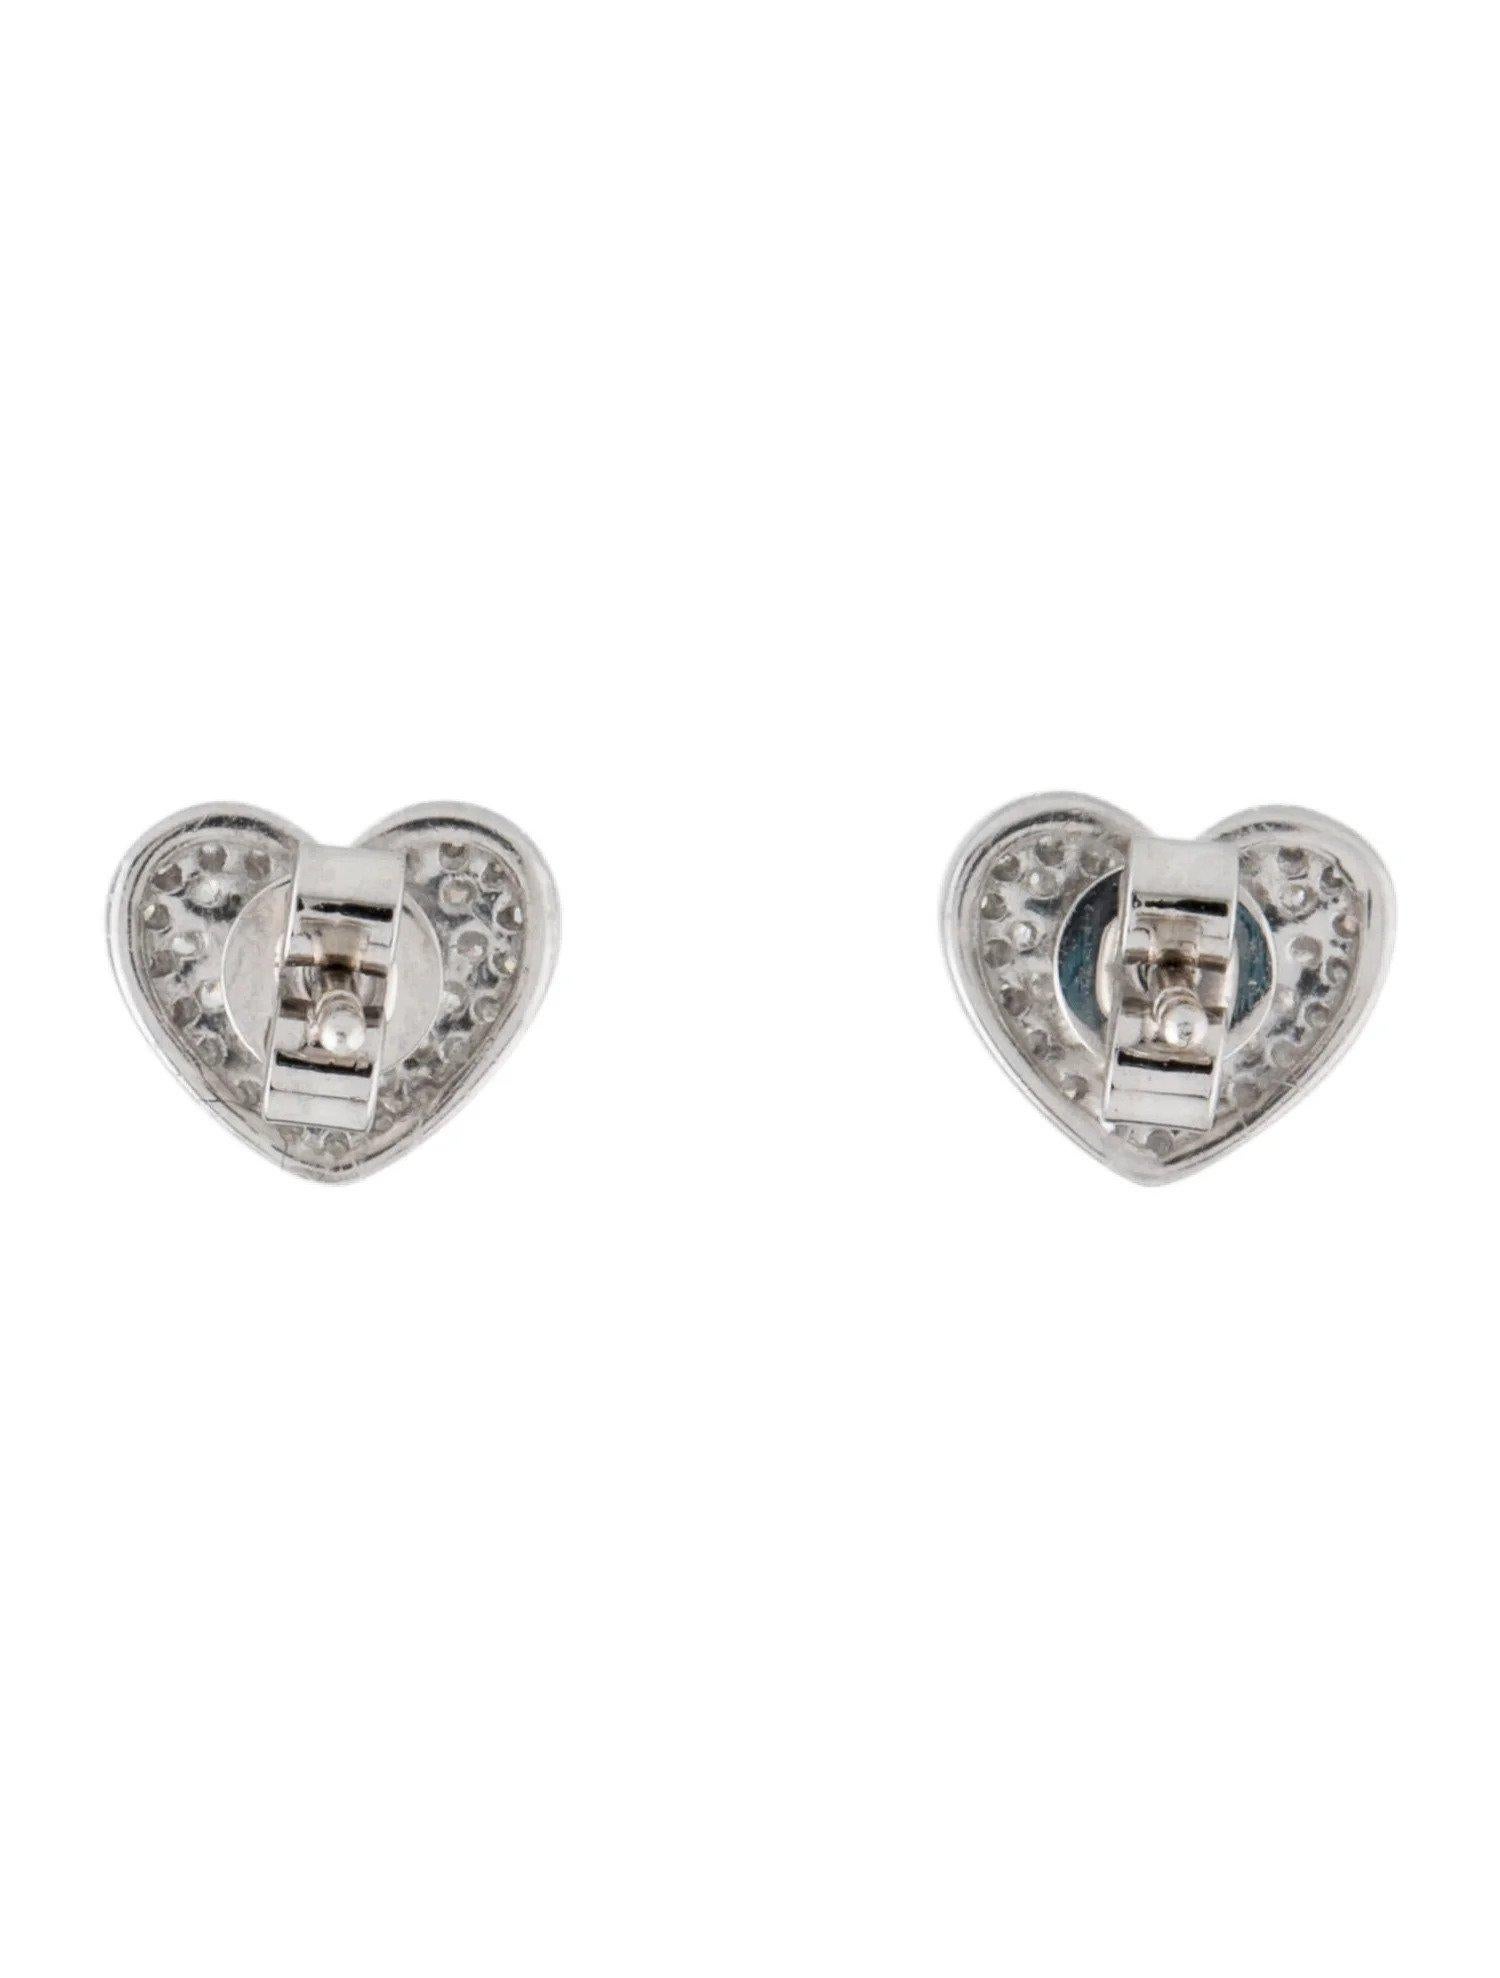 0.25 Carat Diamond Heart White Gold Stud Earrings  In New Condition For Sale In Great Neck, NY